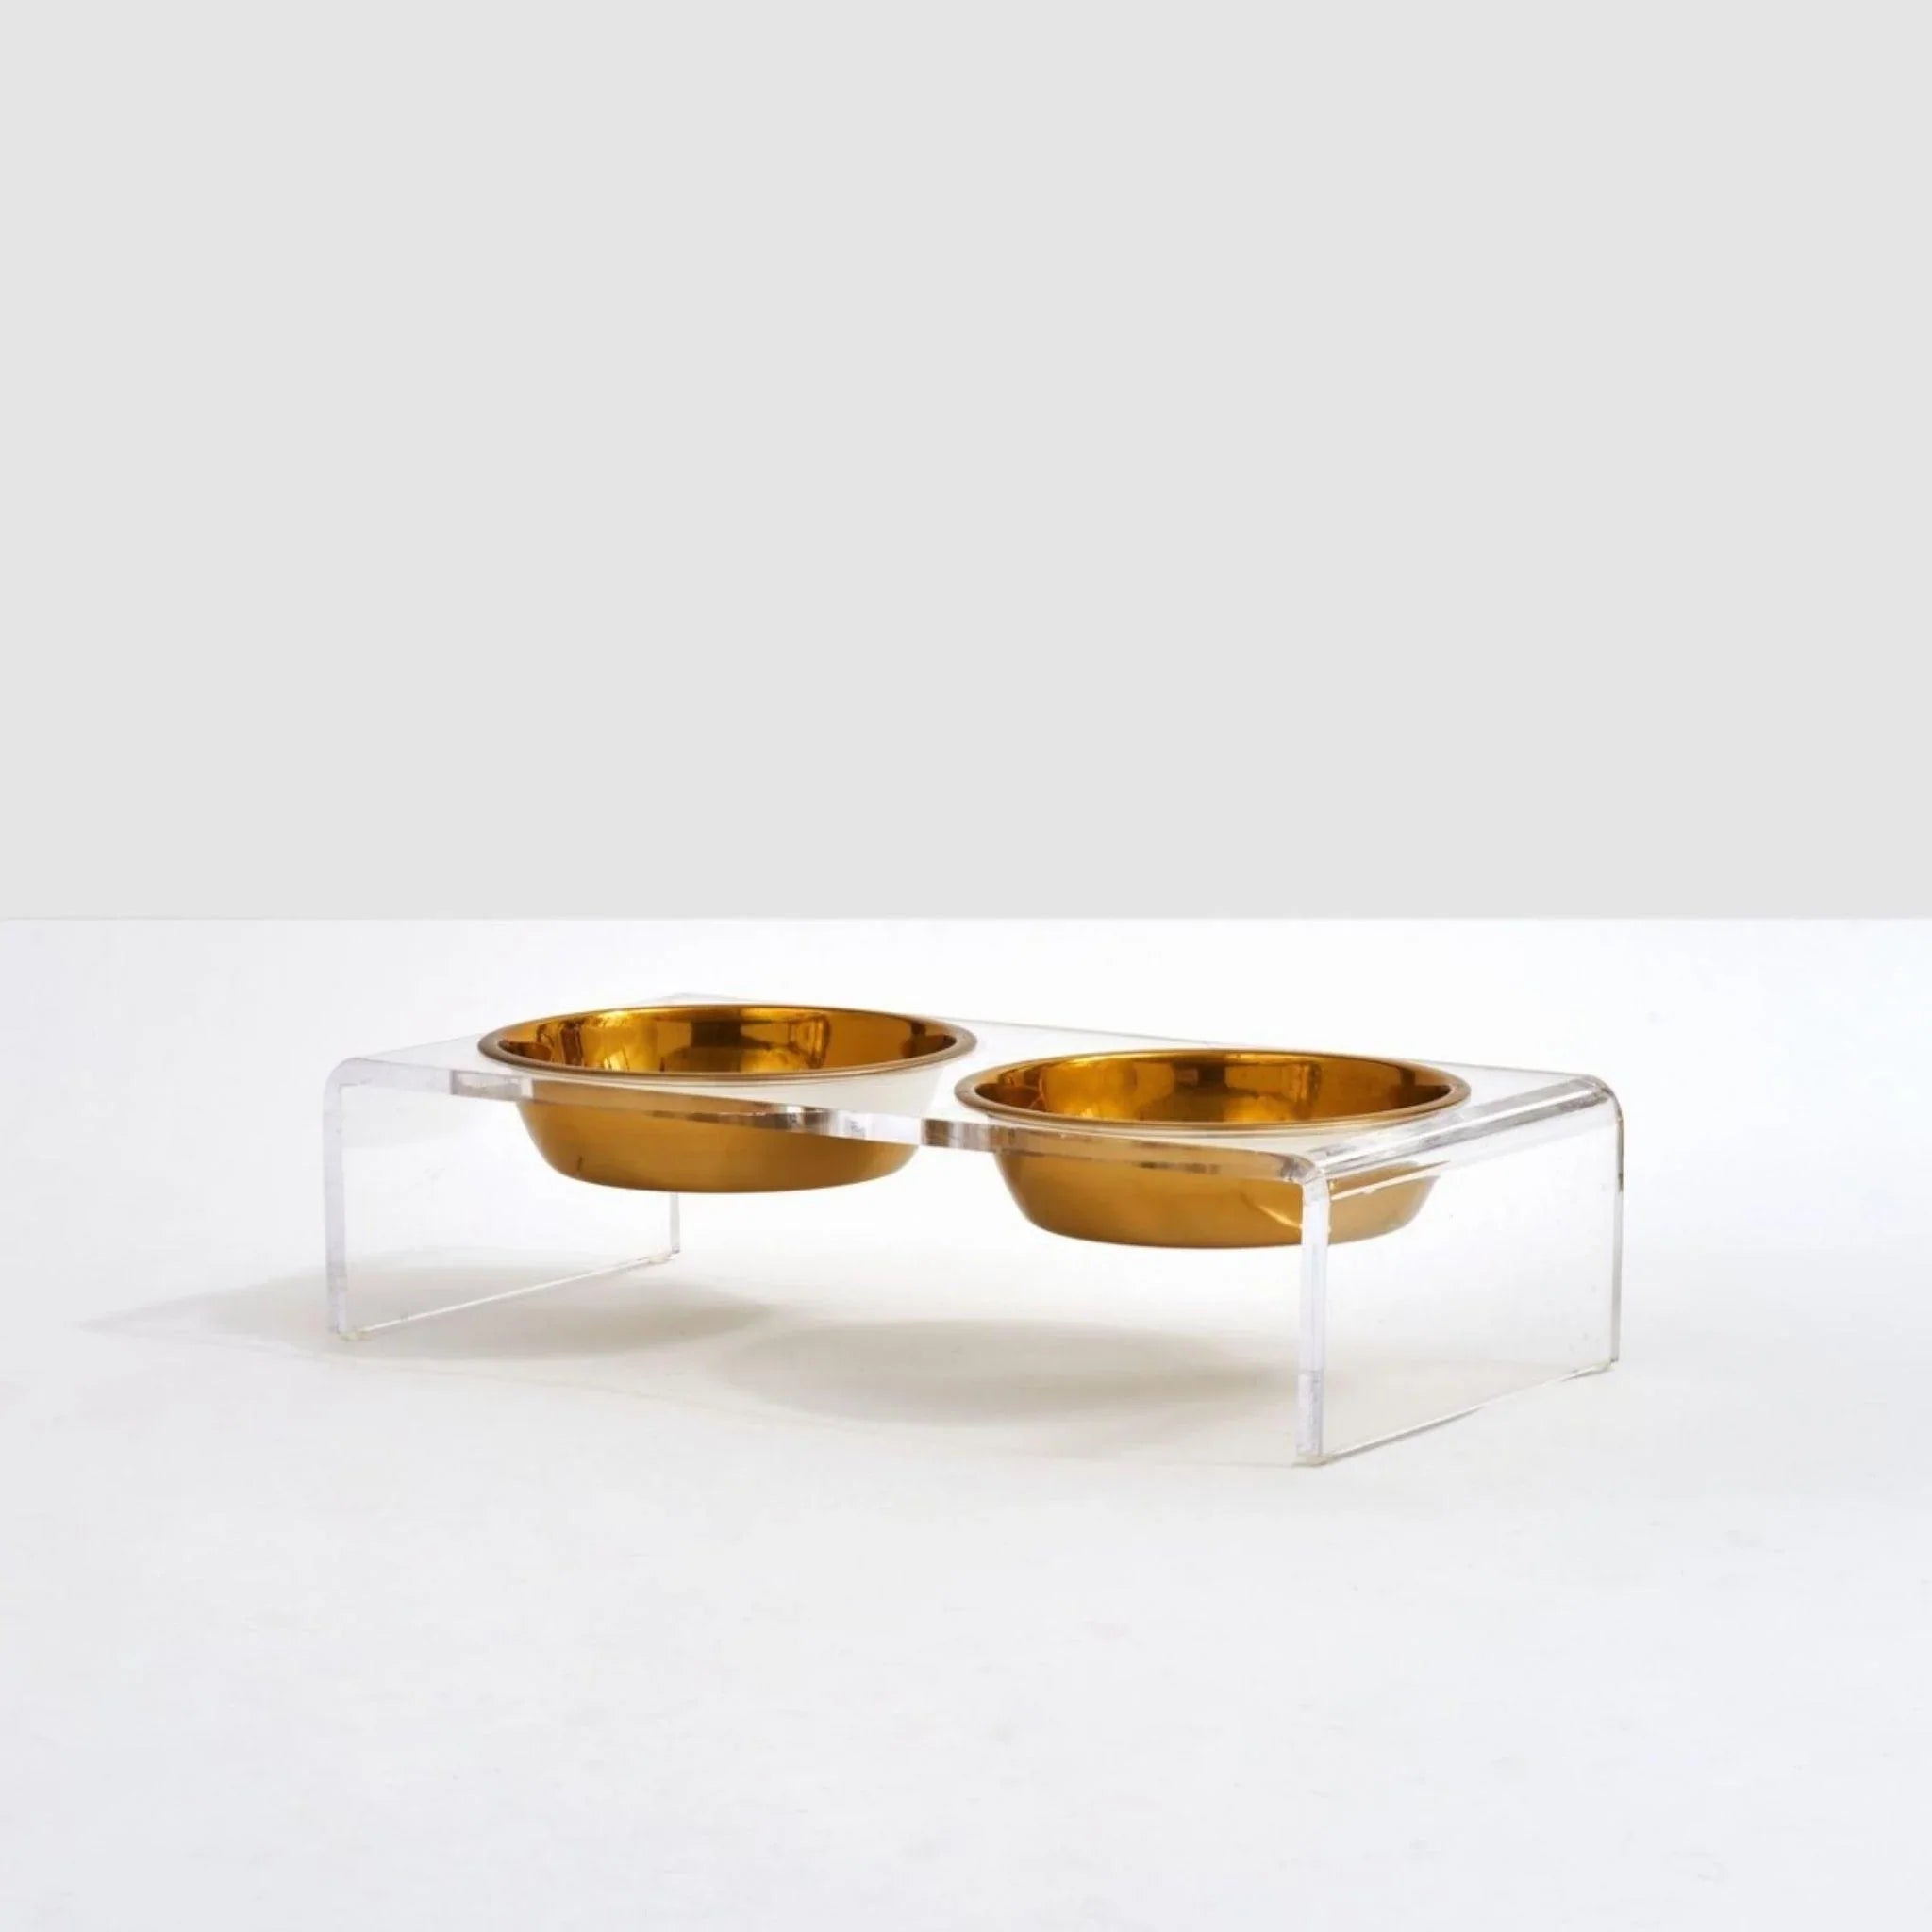 Large Clear Double Pet Bowl Feeder, Pet bowl feeder